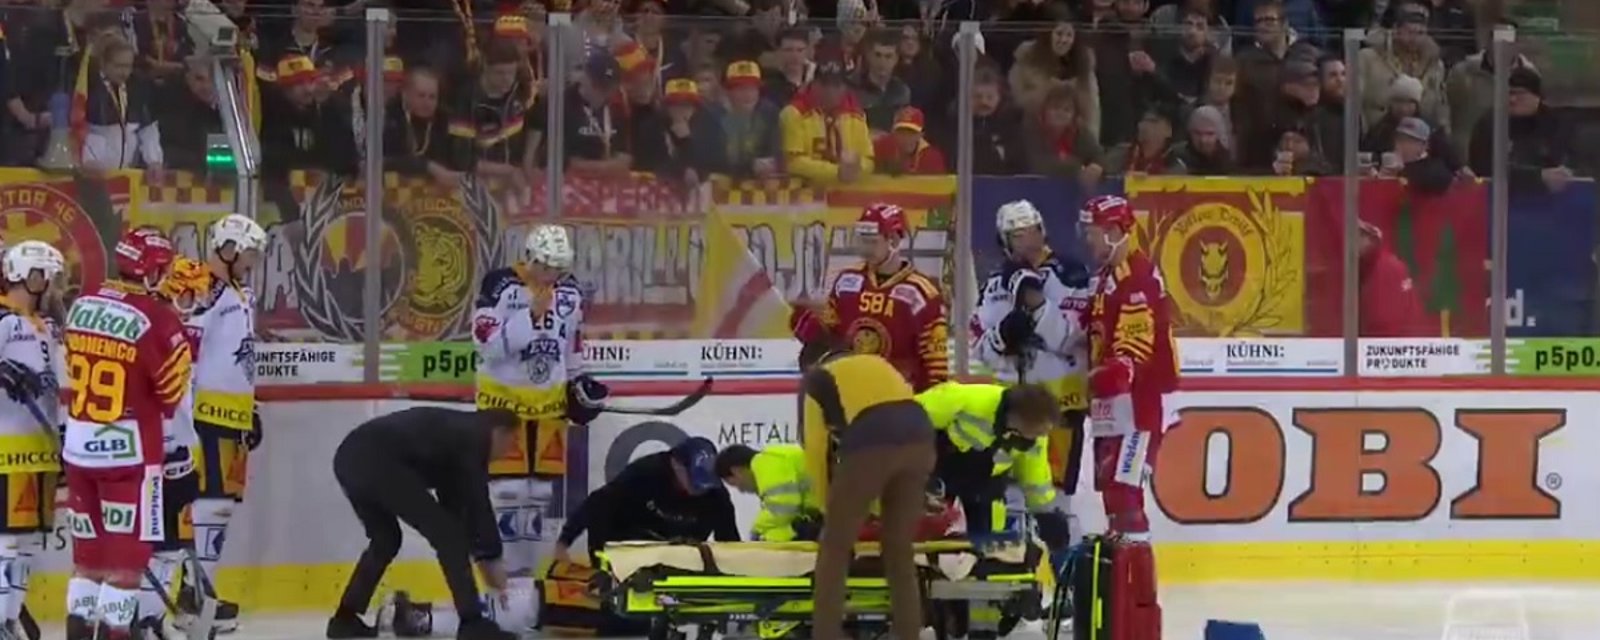 Former NHLer carried off the ice after suffering a broken neck.